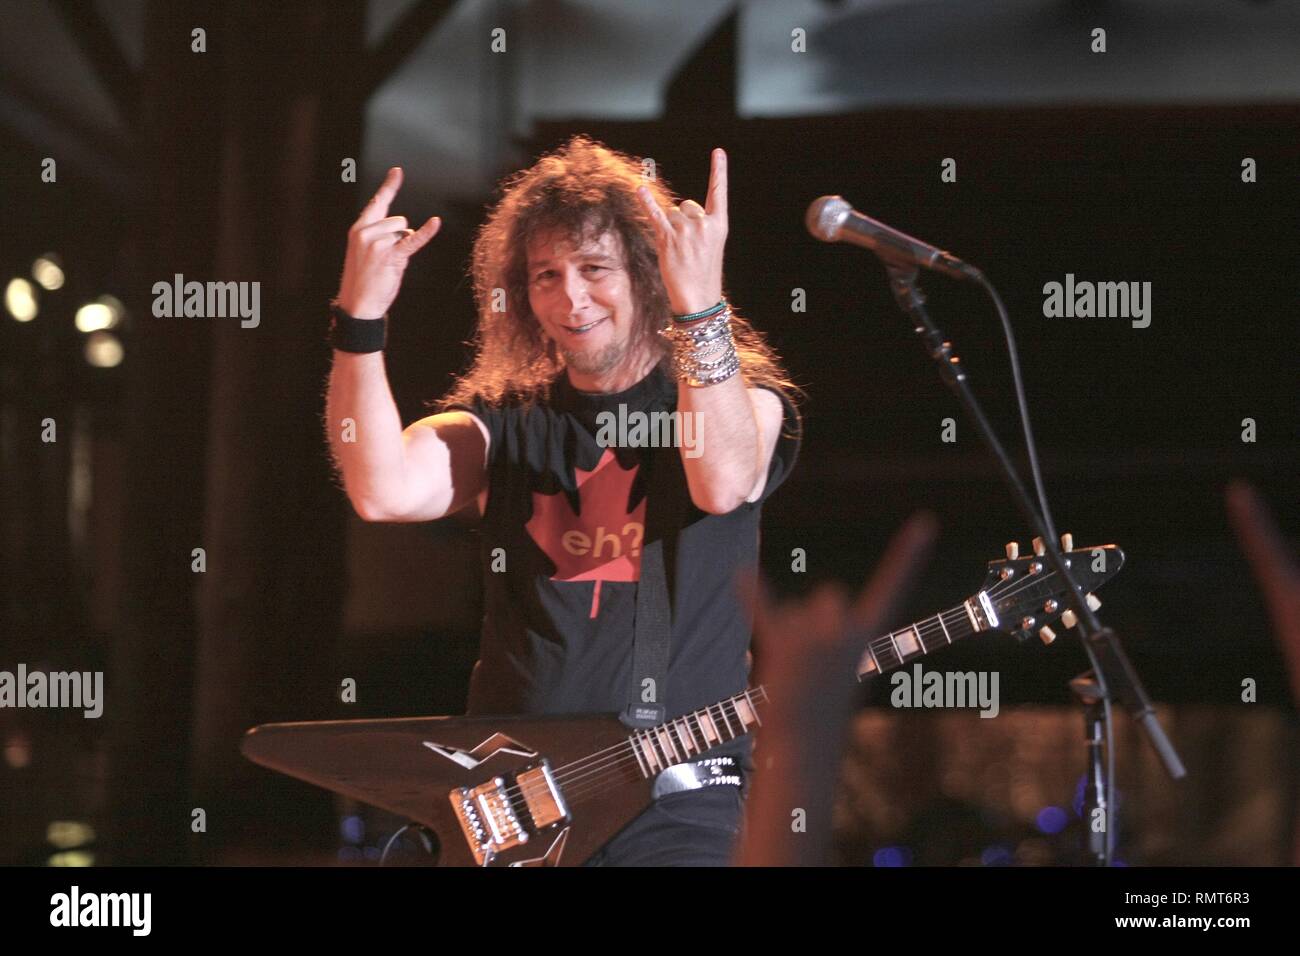 Lead singer and guitarist Steve 'Lips' Kudlow of the Heavy Metal band Anvil is shown performing on stage during a 'live' concert appearance. Stock Photo